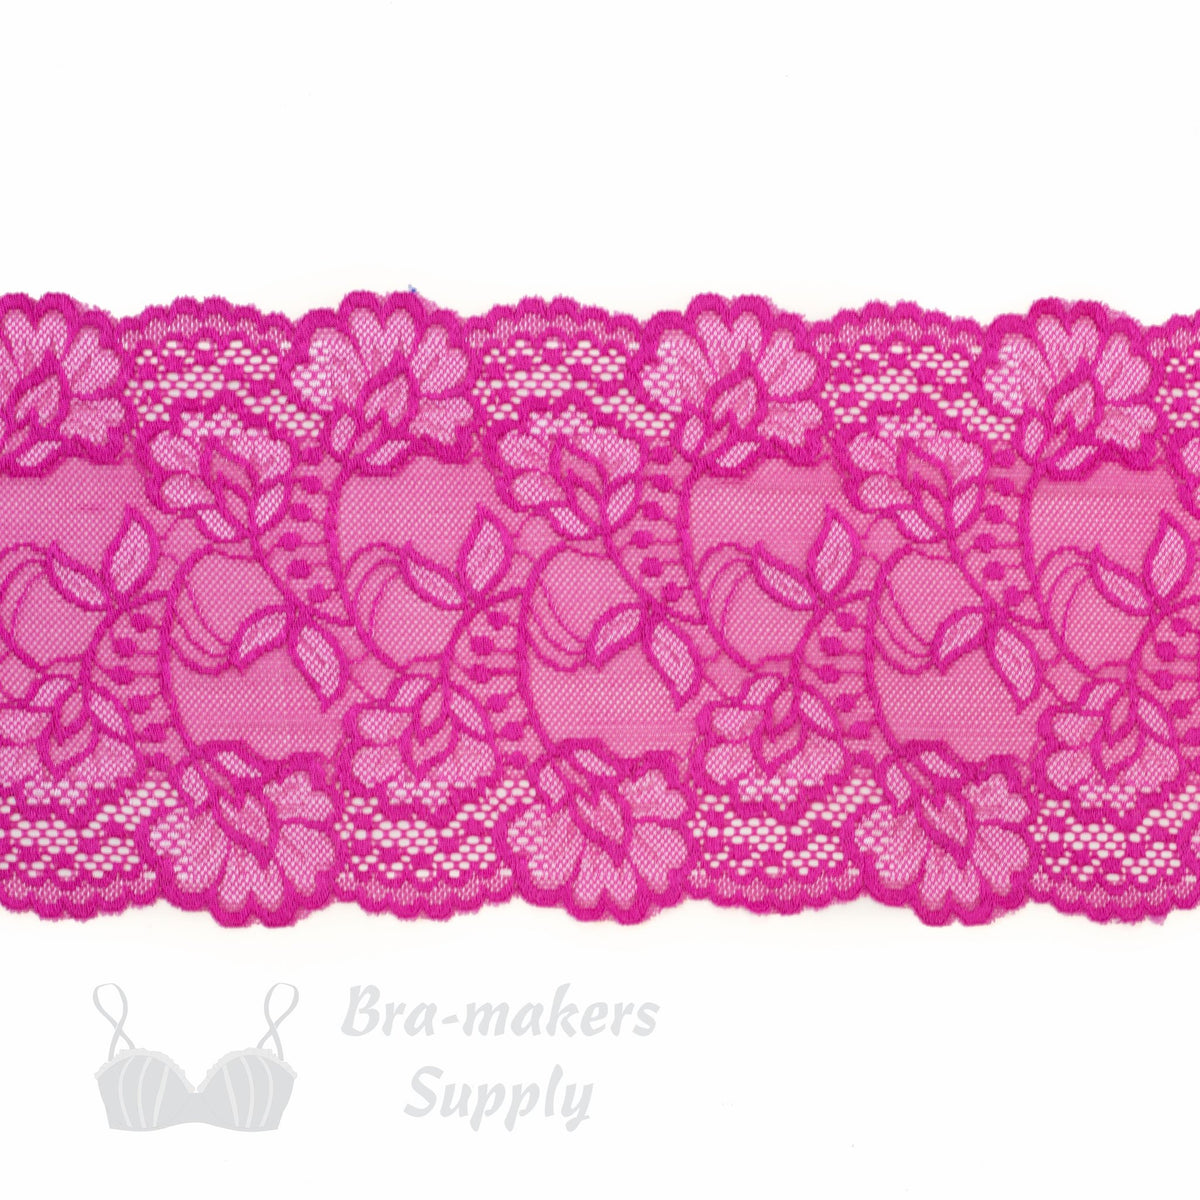 Sheer Bra Kit, Fuchsia and White Sheer Full Bra Kit (Fabric, Findings, Lace  and Sheer Cup Lining)